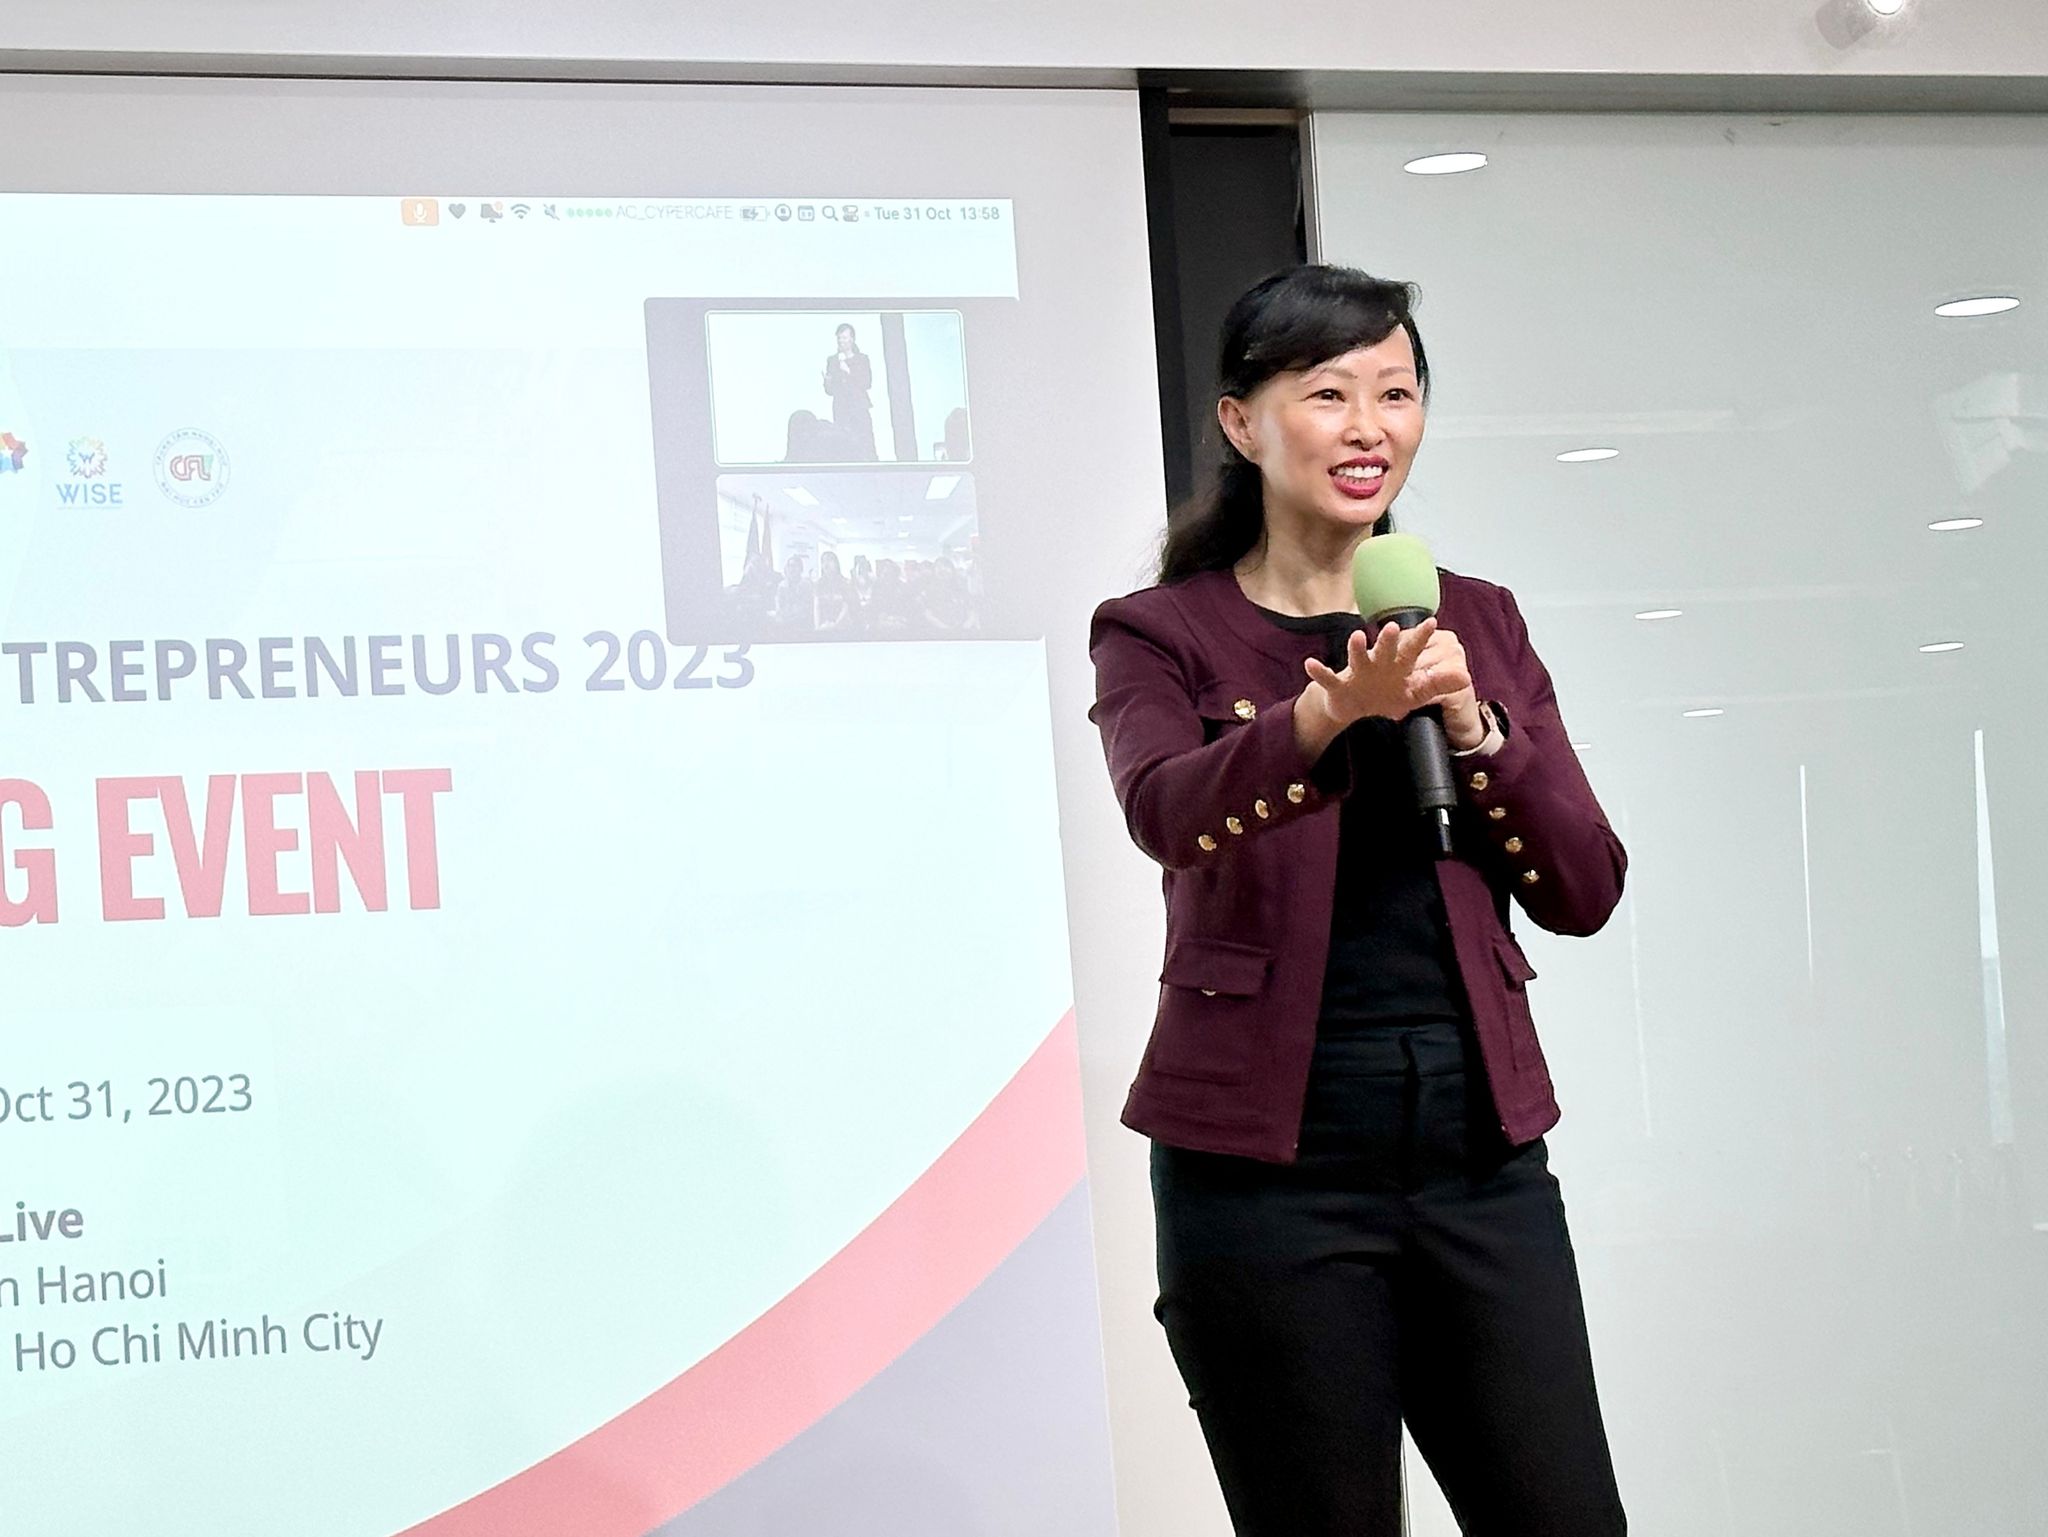 Thai Van Linh, CEO and founder of TVL Group, speaks at the launch ceremony for the Academy for Women Entrepreneurs 2023, October 31, 2023. Photo: Bao Anh / Tuoi Tre News